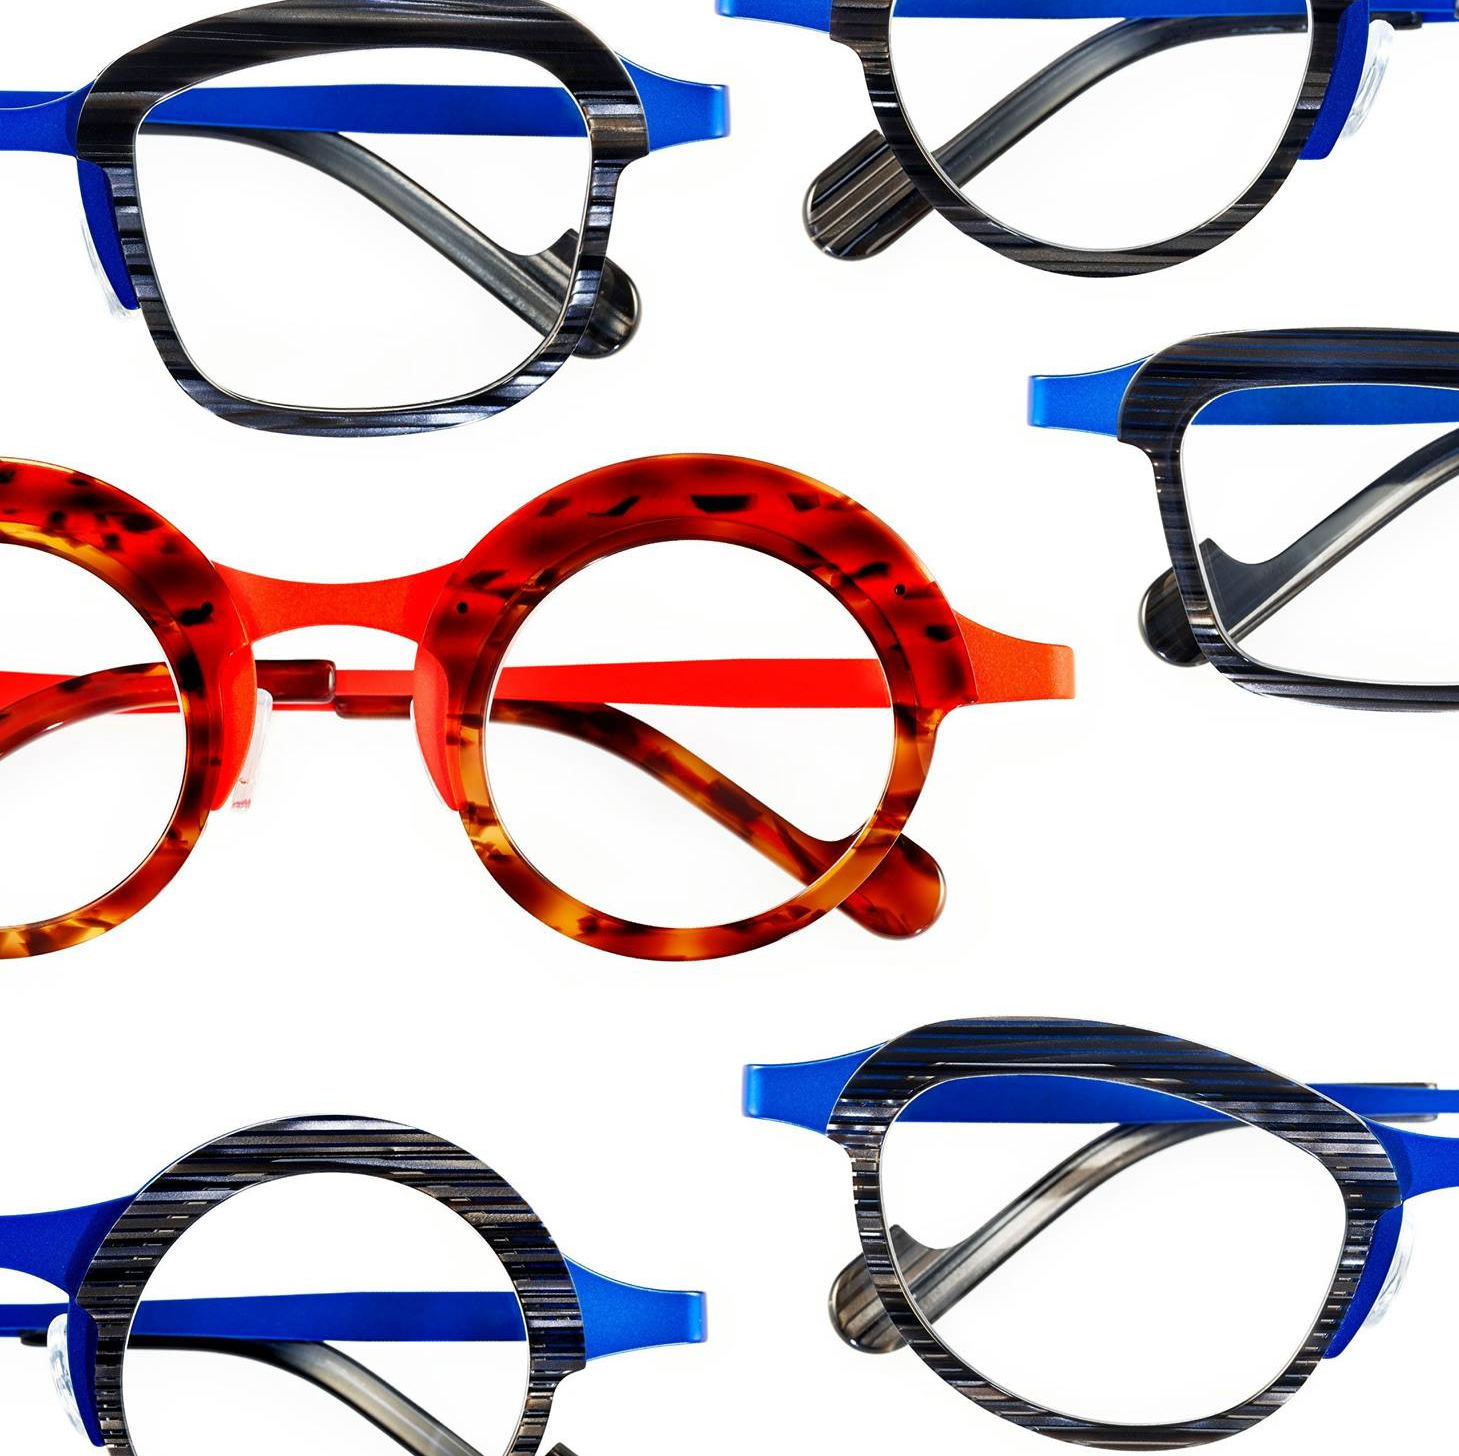 Several Theo frames in red, black and blue colors